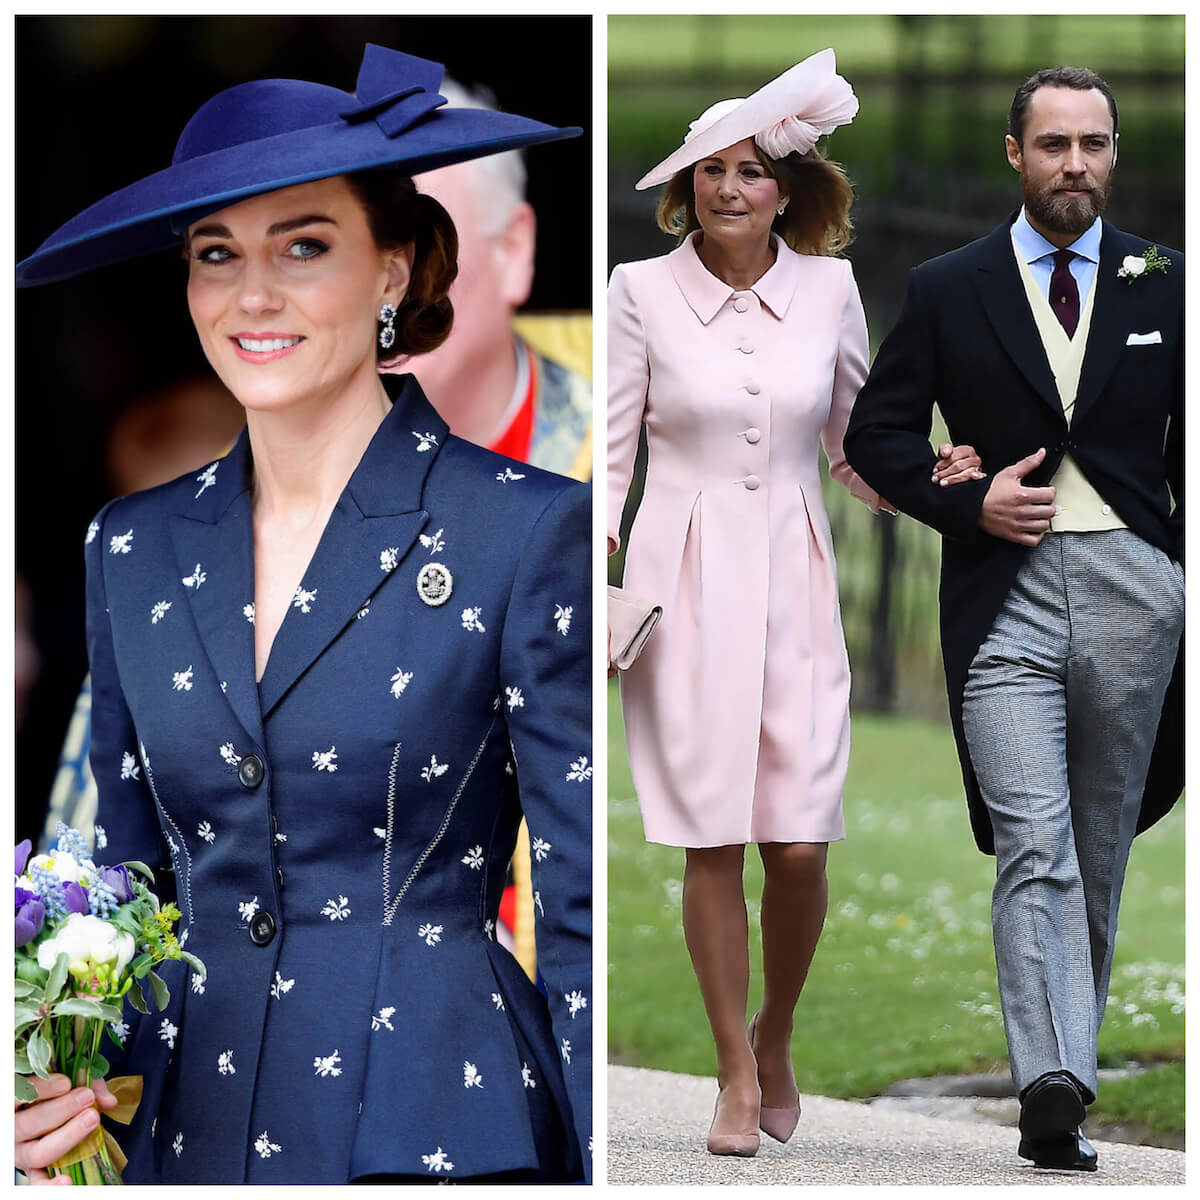 Wedding Photo Hints Kate Middleton’s Mom Treats Her Differently Than Brother James